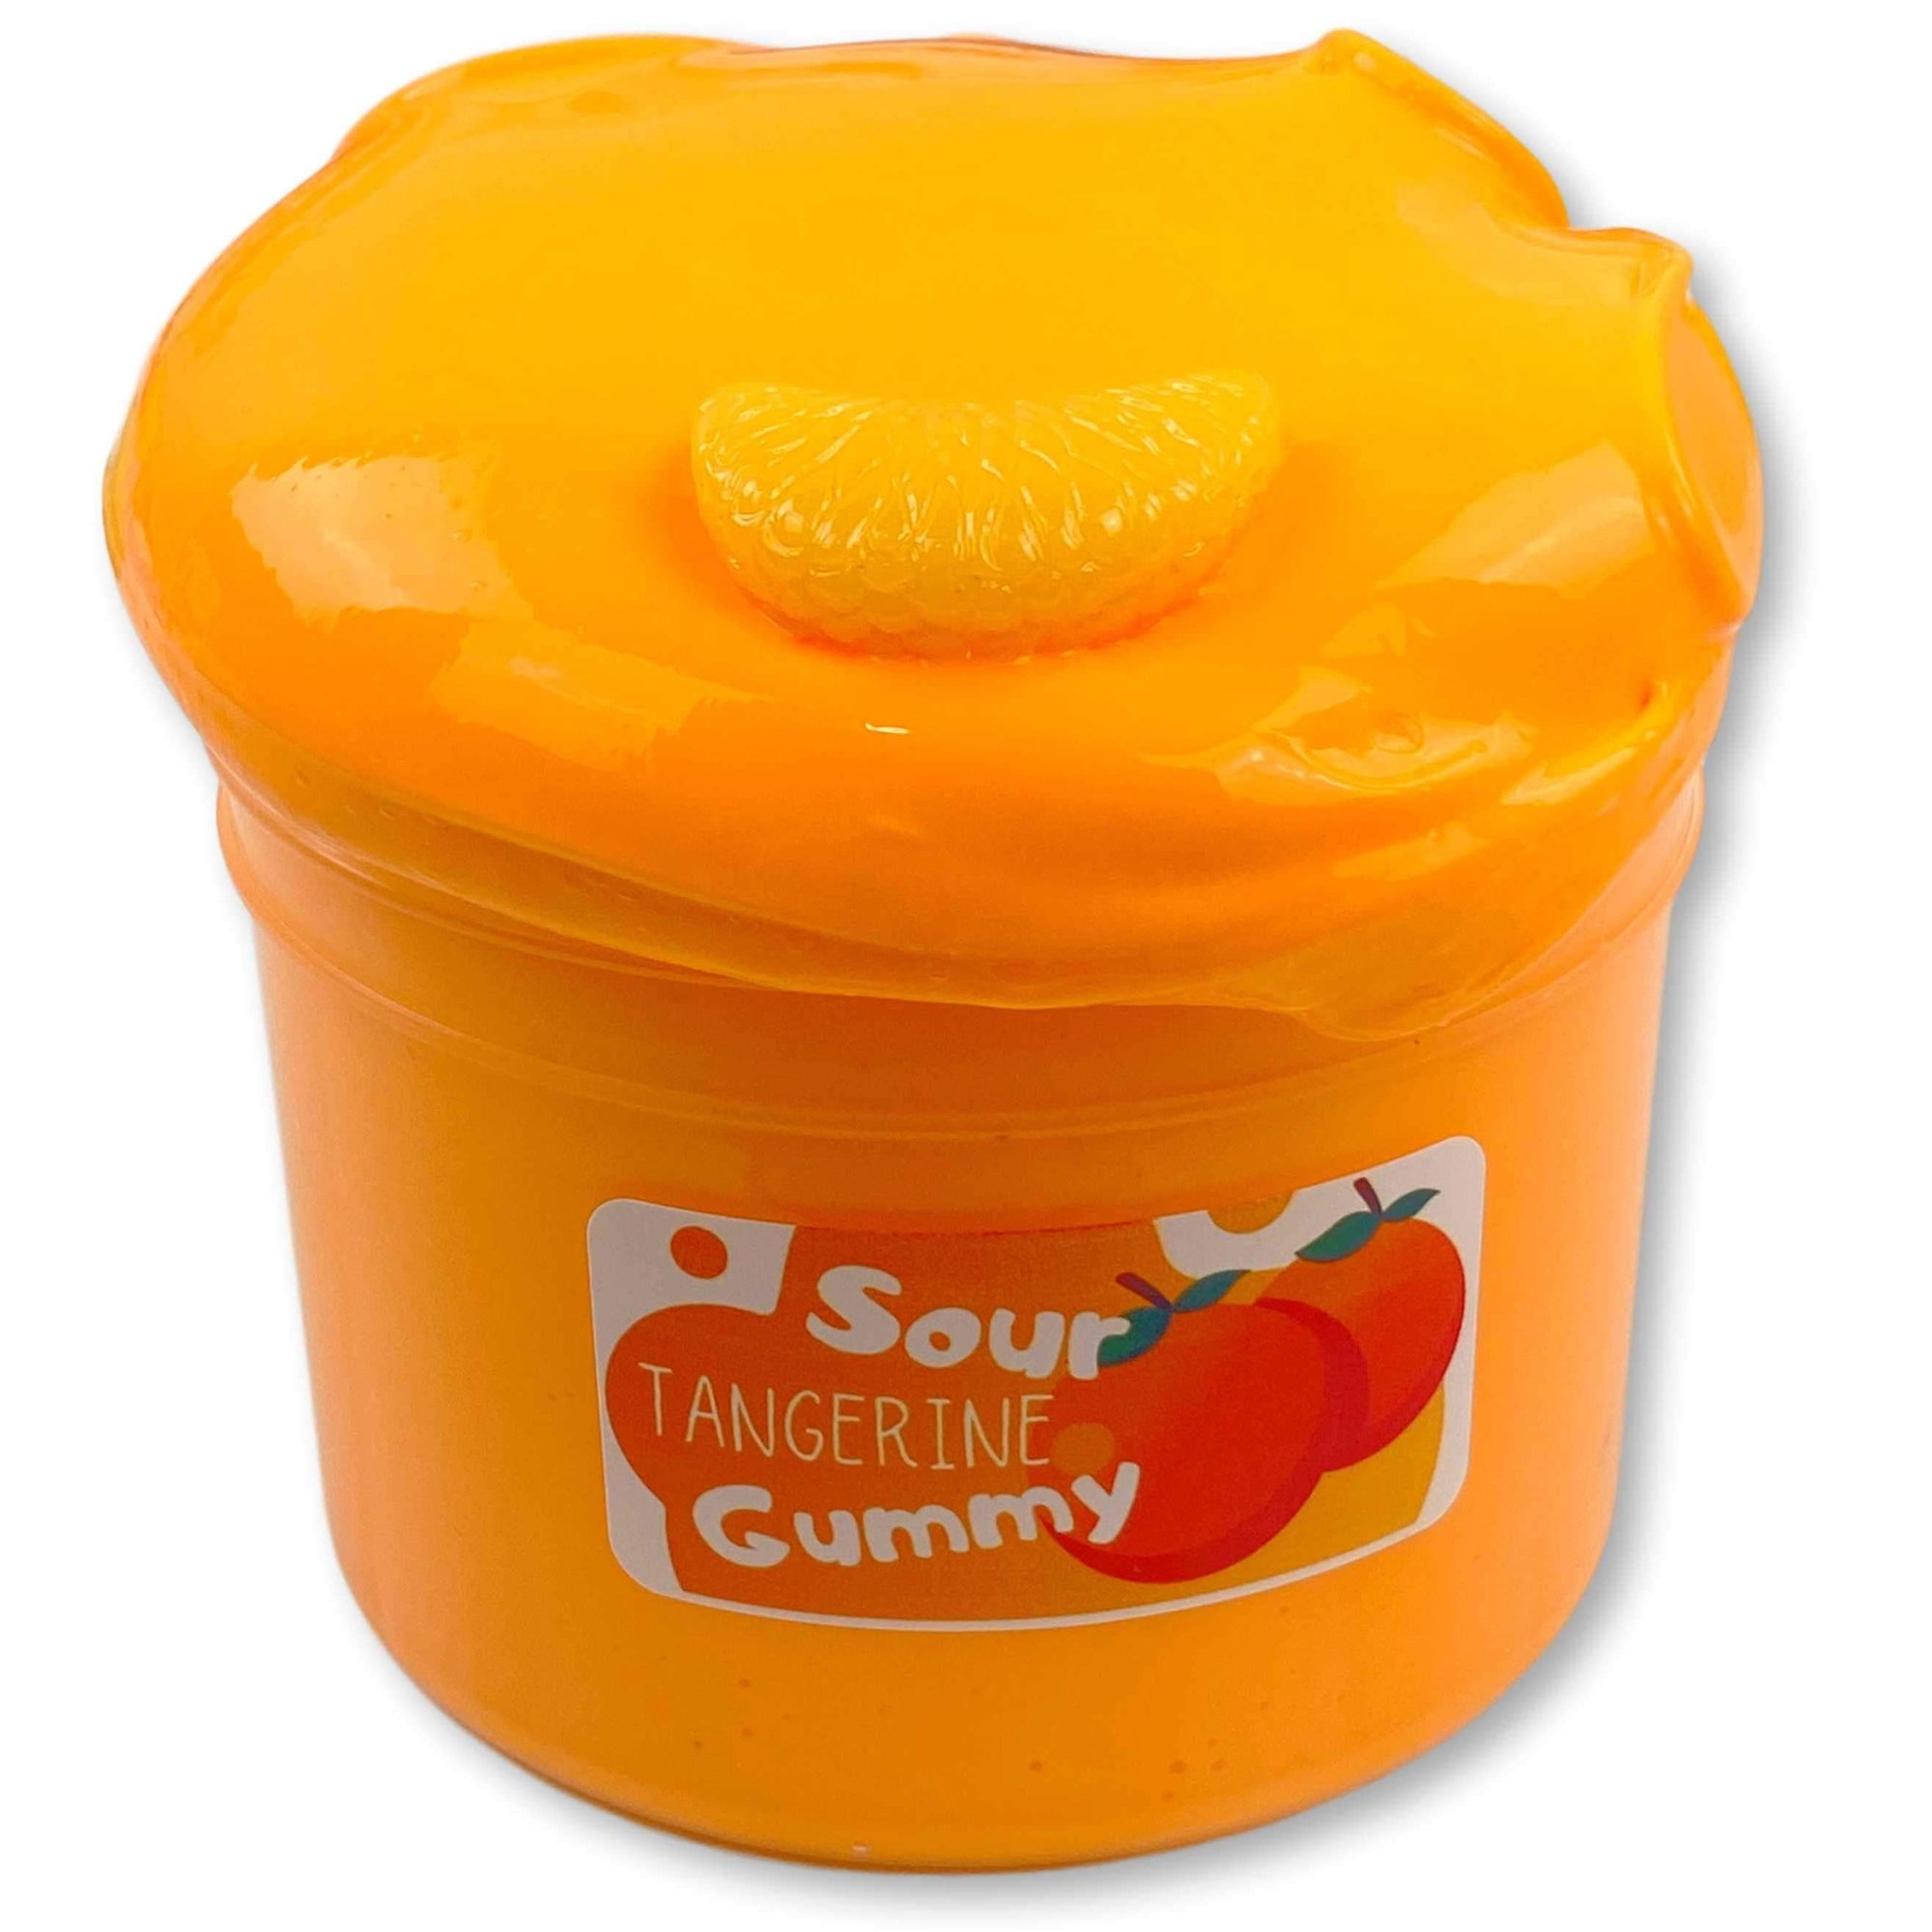 Sour Tangerine Gummy Thick & Glossy Slime - Shop Slime - Dope Slimes